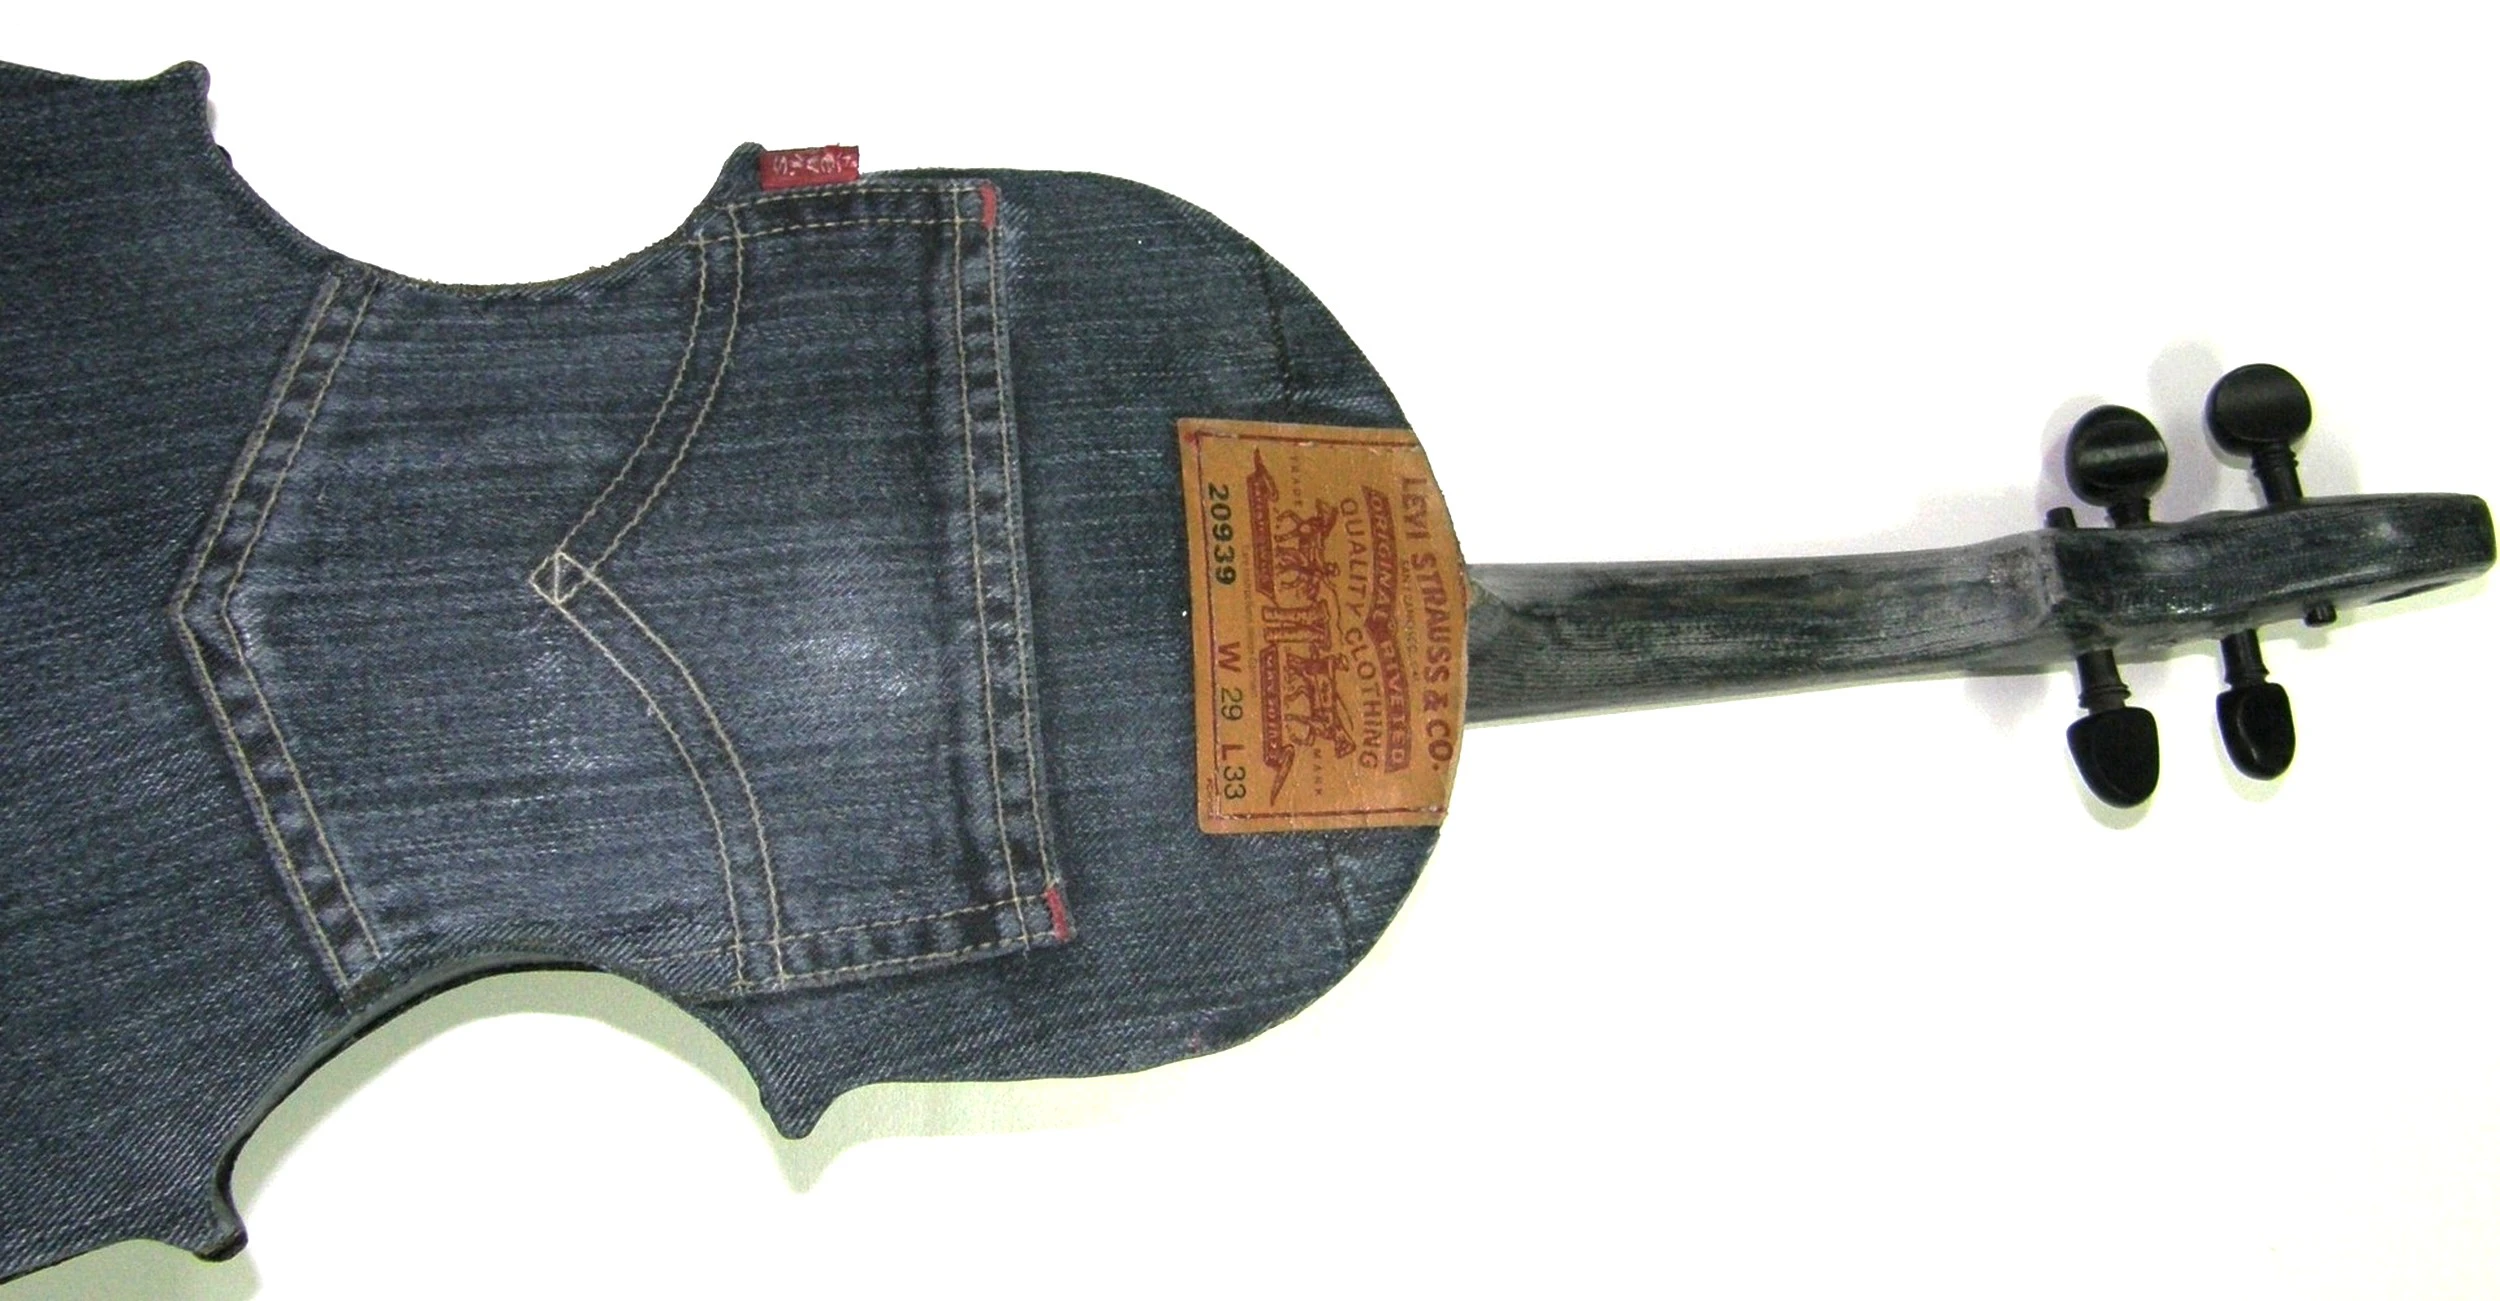 Levi's denim violin, the second life of your old pants.